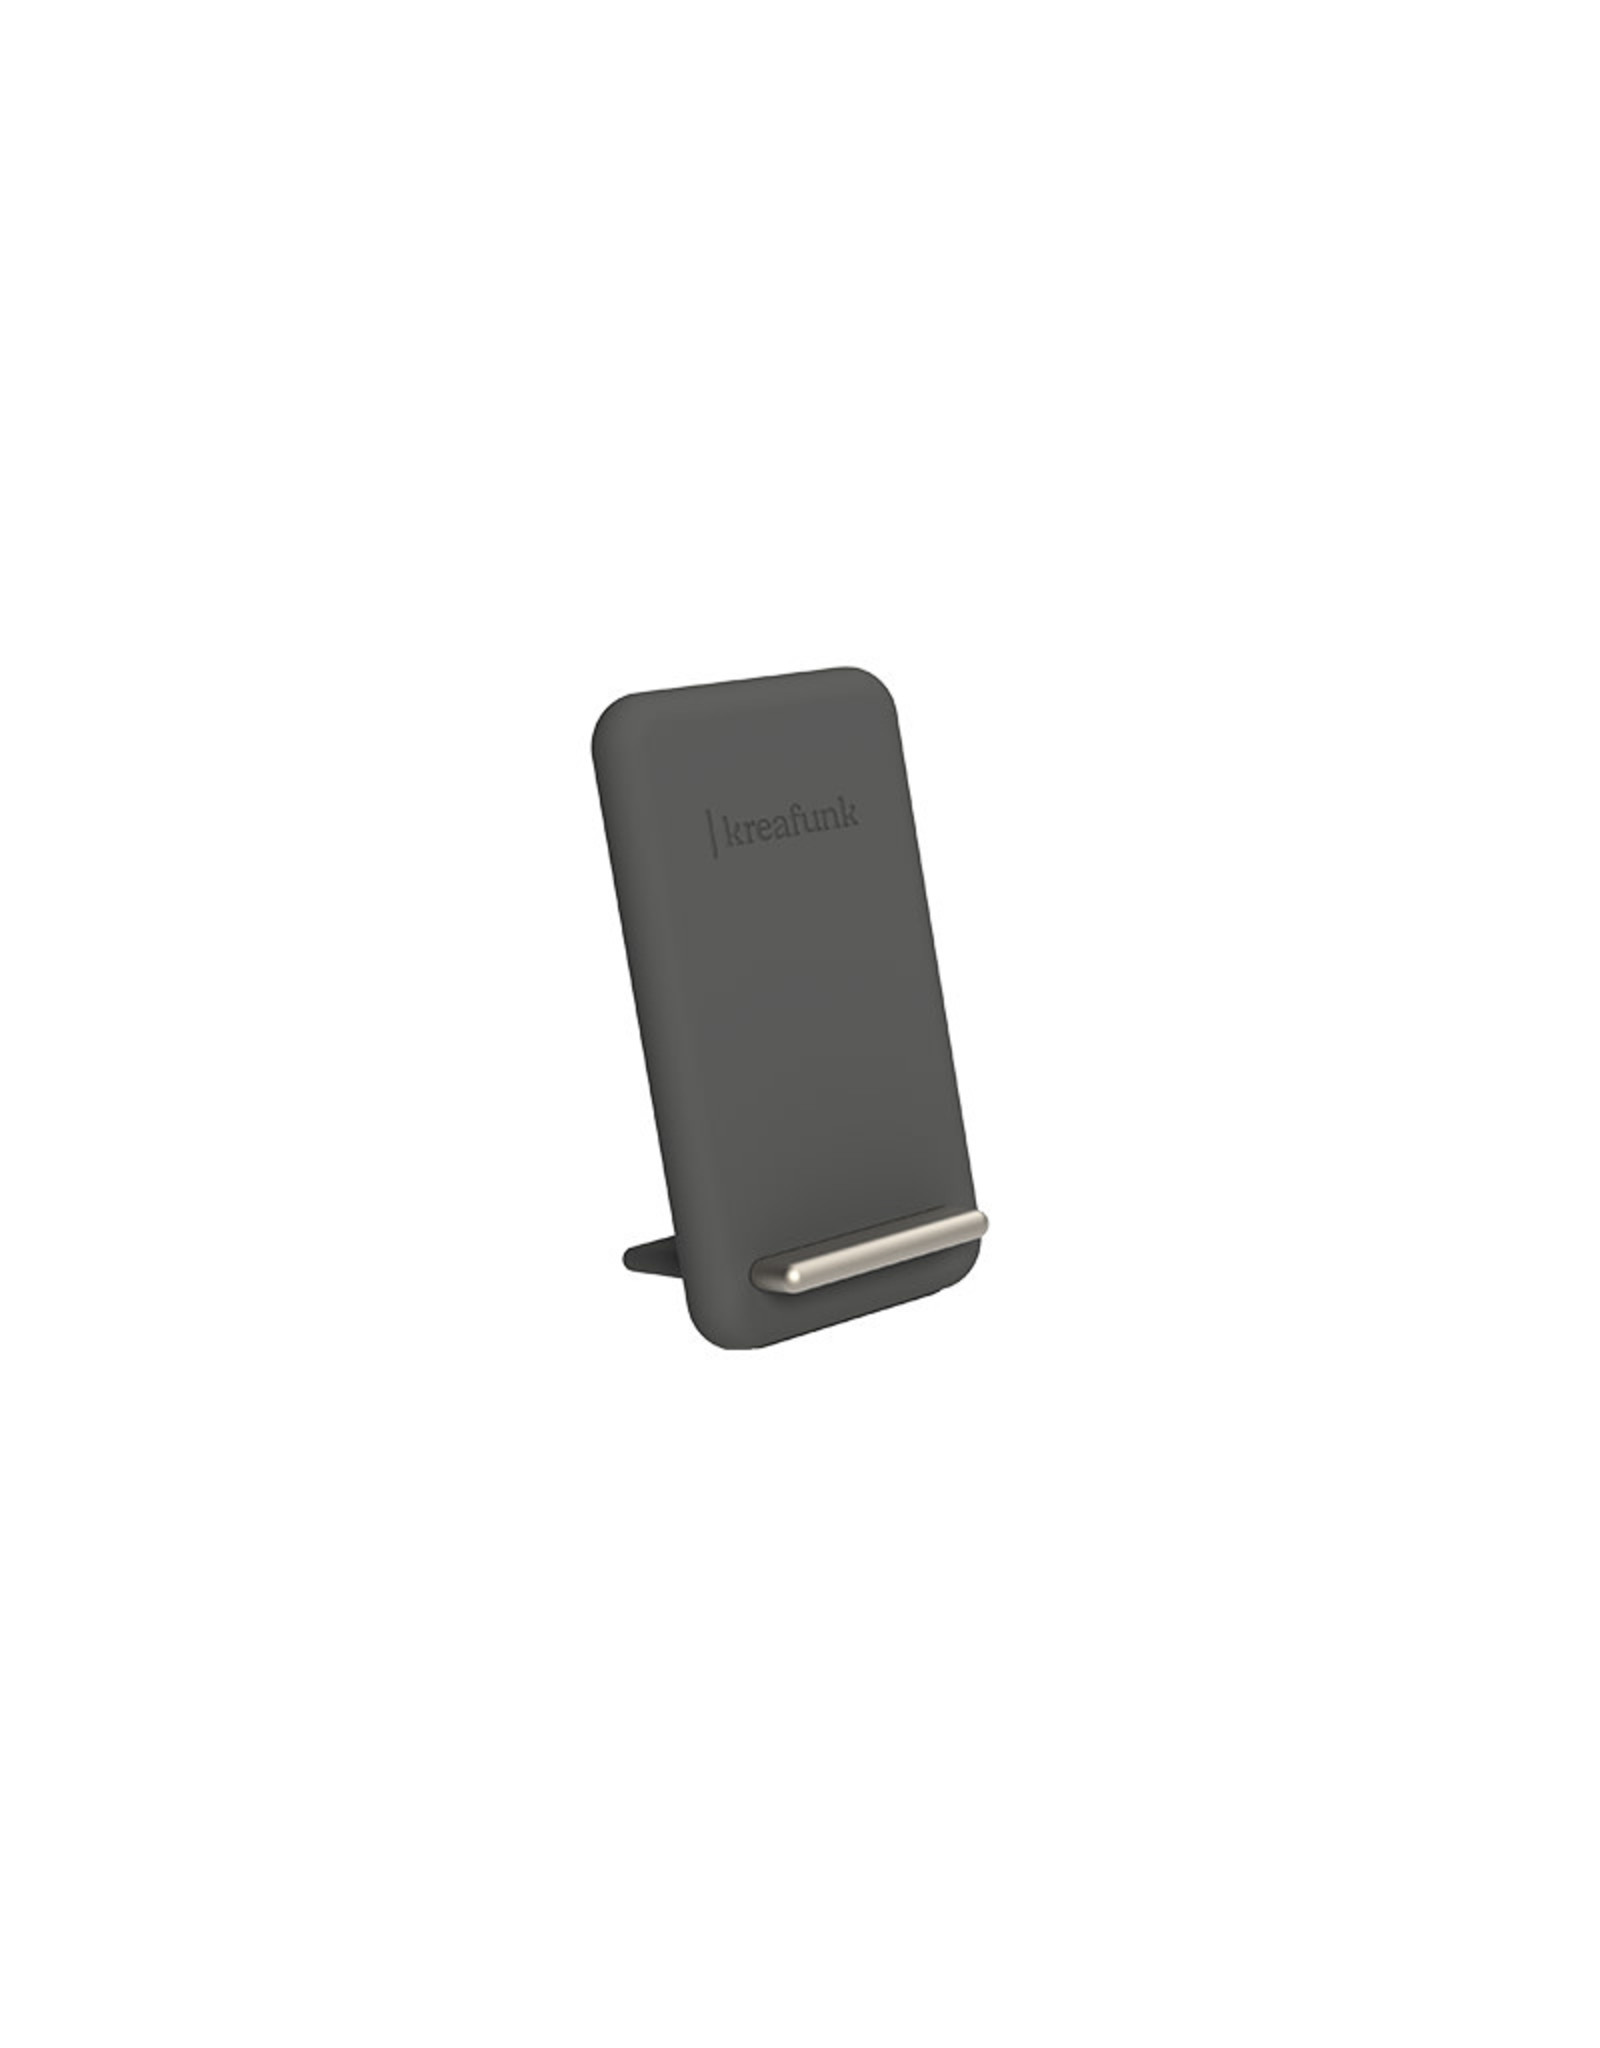 Kreafunk reCharge Wireless Charger - Black